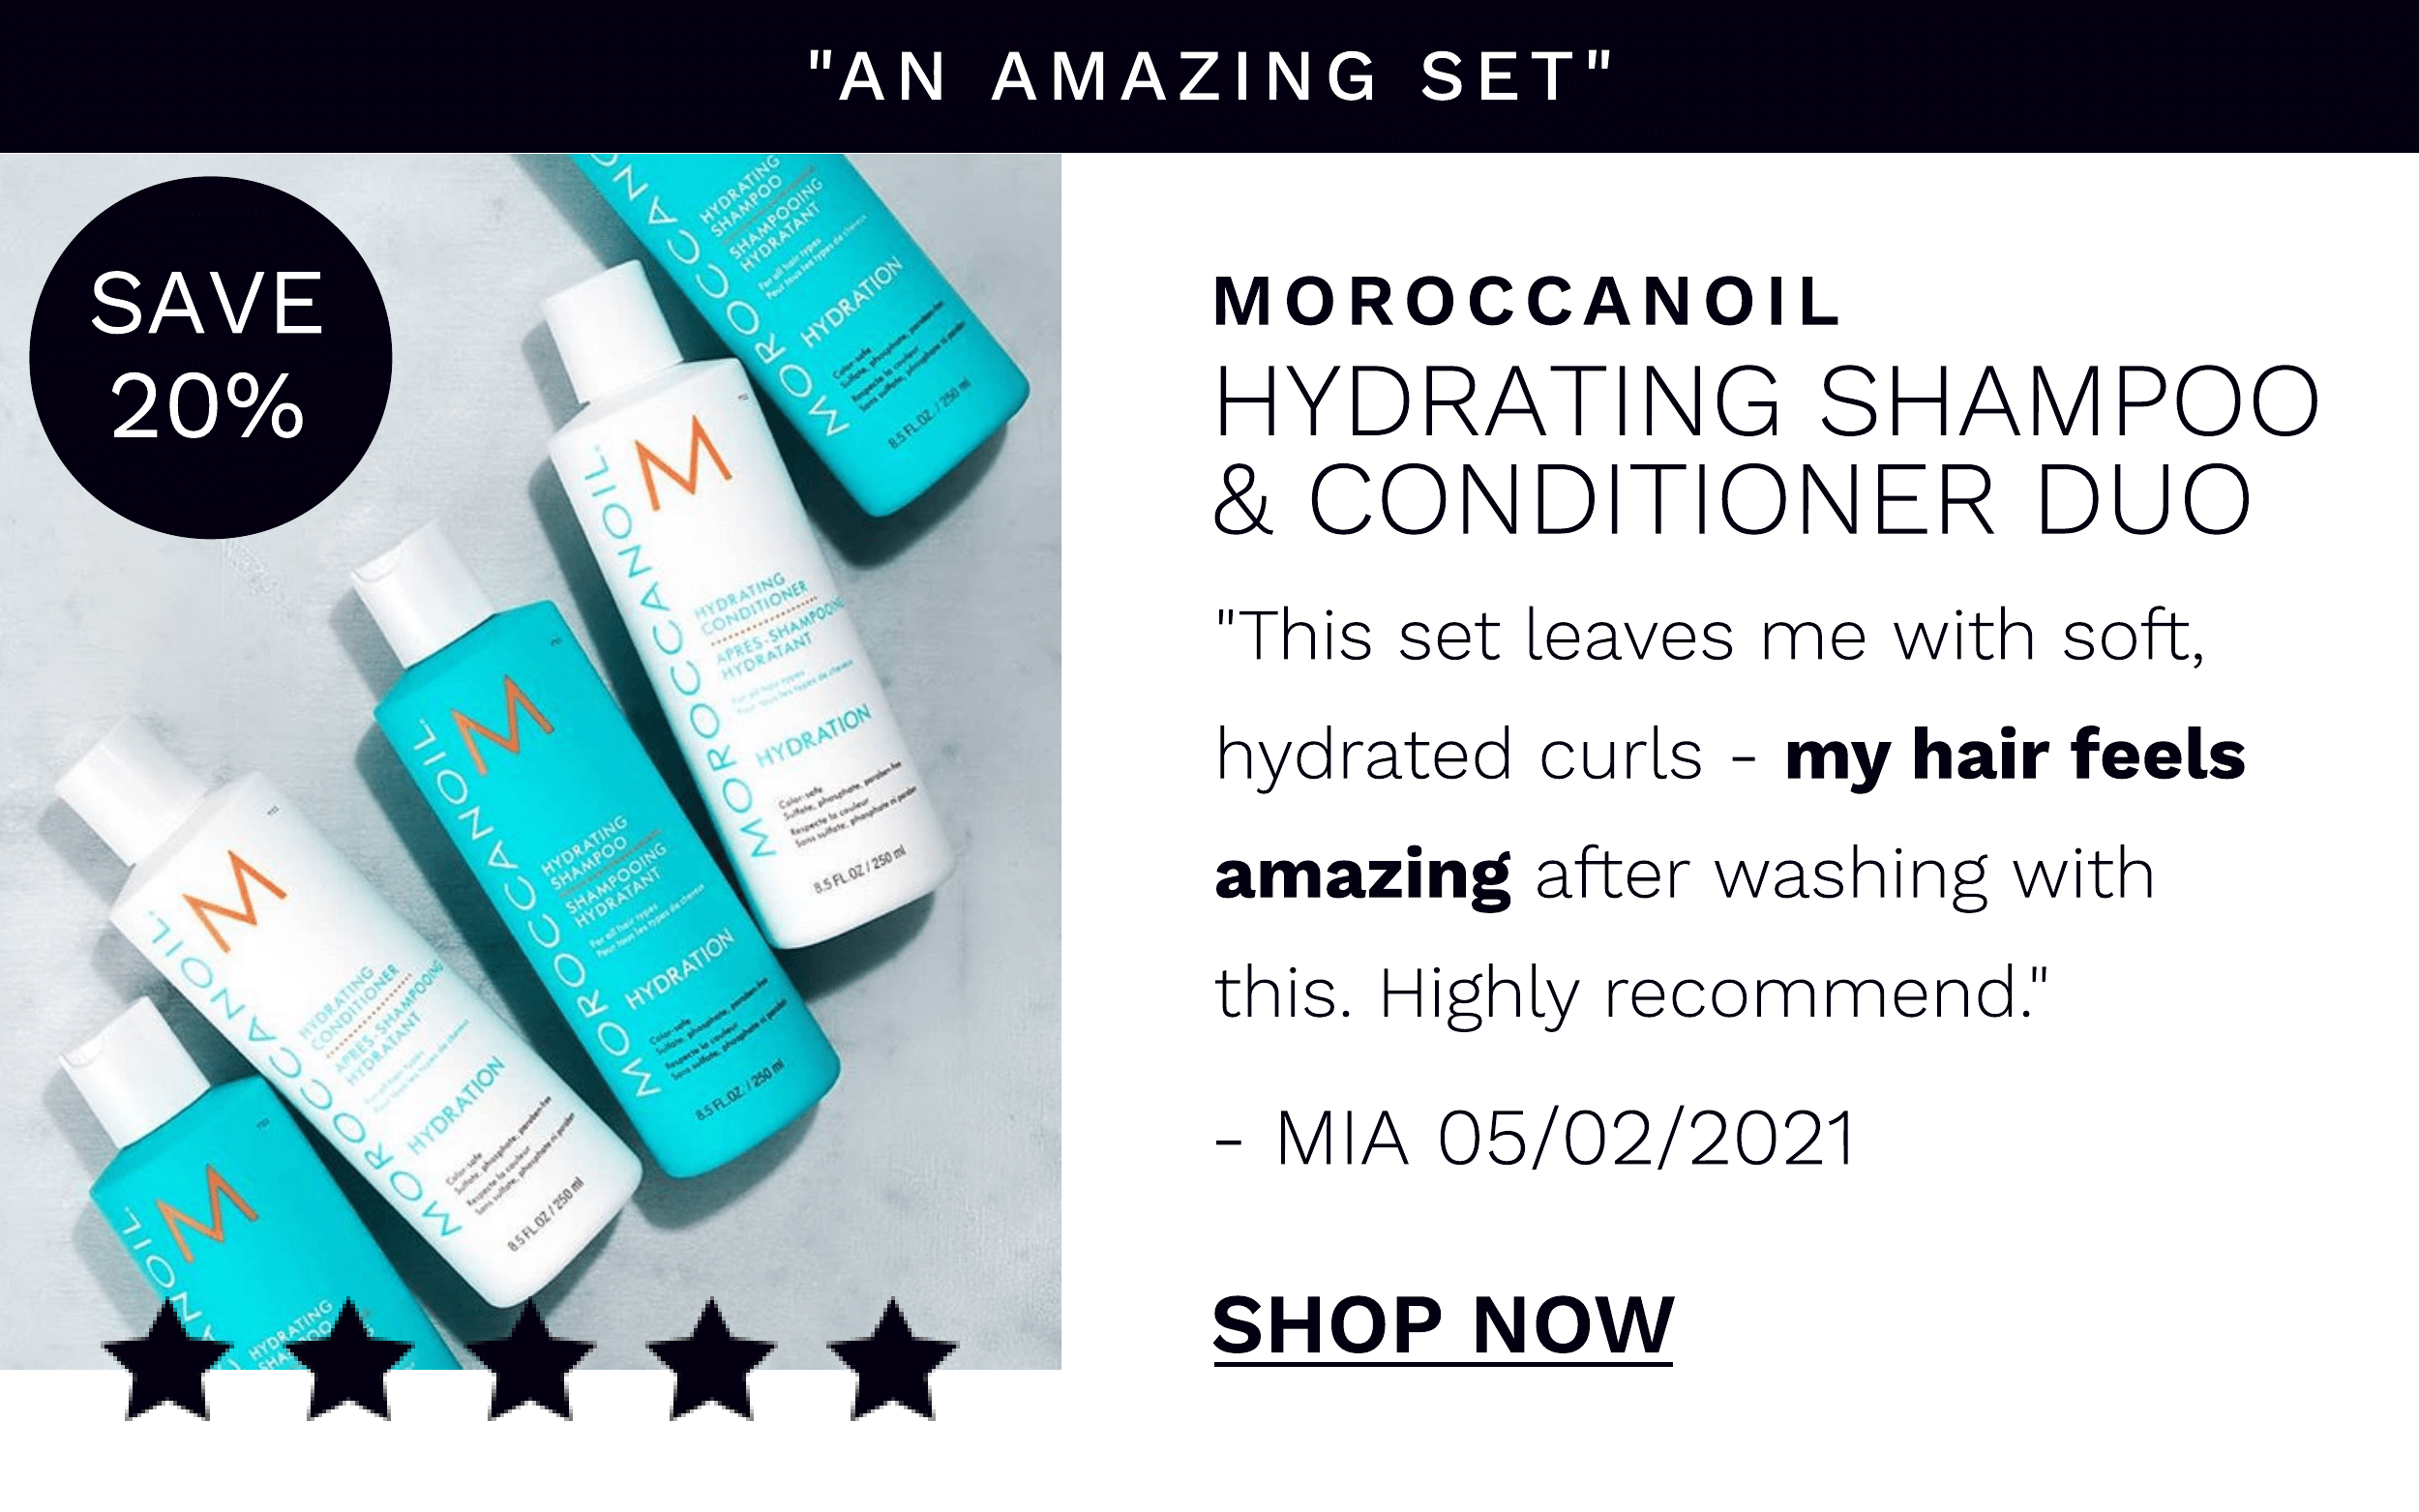 Moroccanoil hydrating shampoo and conditioner duo